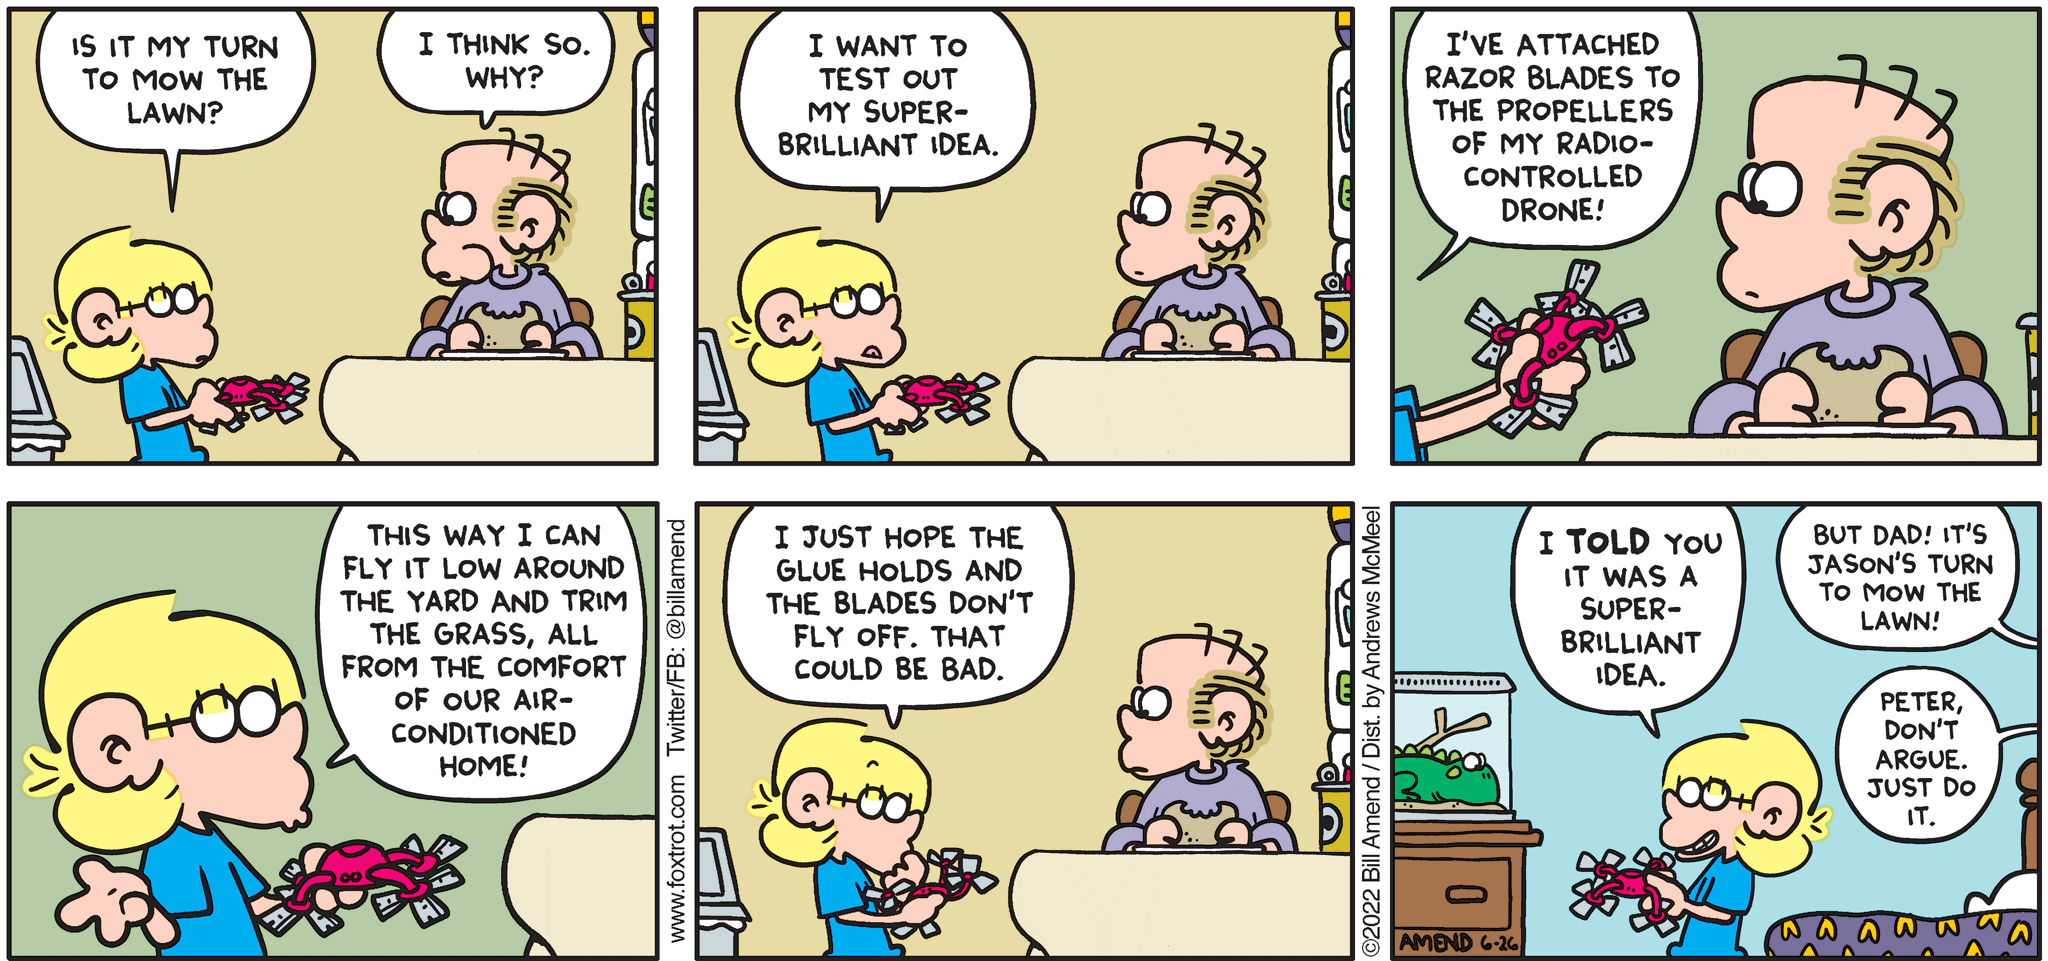 FoxTrot comic strip by Bill Amend - "Never Dull" published June 26, 2022 - Transcript: Jason Fox: Is it my turn to mow the lawn? Roger Fox: I think so. Why? Jason Fox: I want to test out my super brilliant idea. I've attached razor blades to the propellers of my radio-controlled drone! This way I can fly it low around the yard and trim the grass, all from the comfort of our air-conditioned home! I just hope this glue holds and the blades don't fly off. That could be bad. I TOLD you it was a super-brilliant idea! Peter Fox: But Dad! It's Jason's turn to mow the lawn! Roger Fox: Peter, don't argue. Just do it.